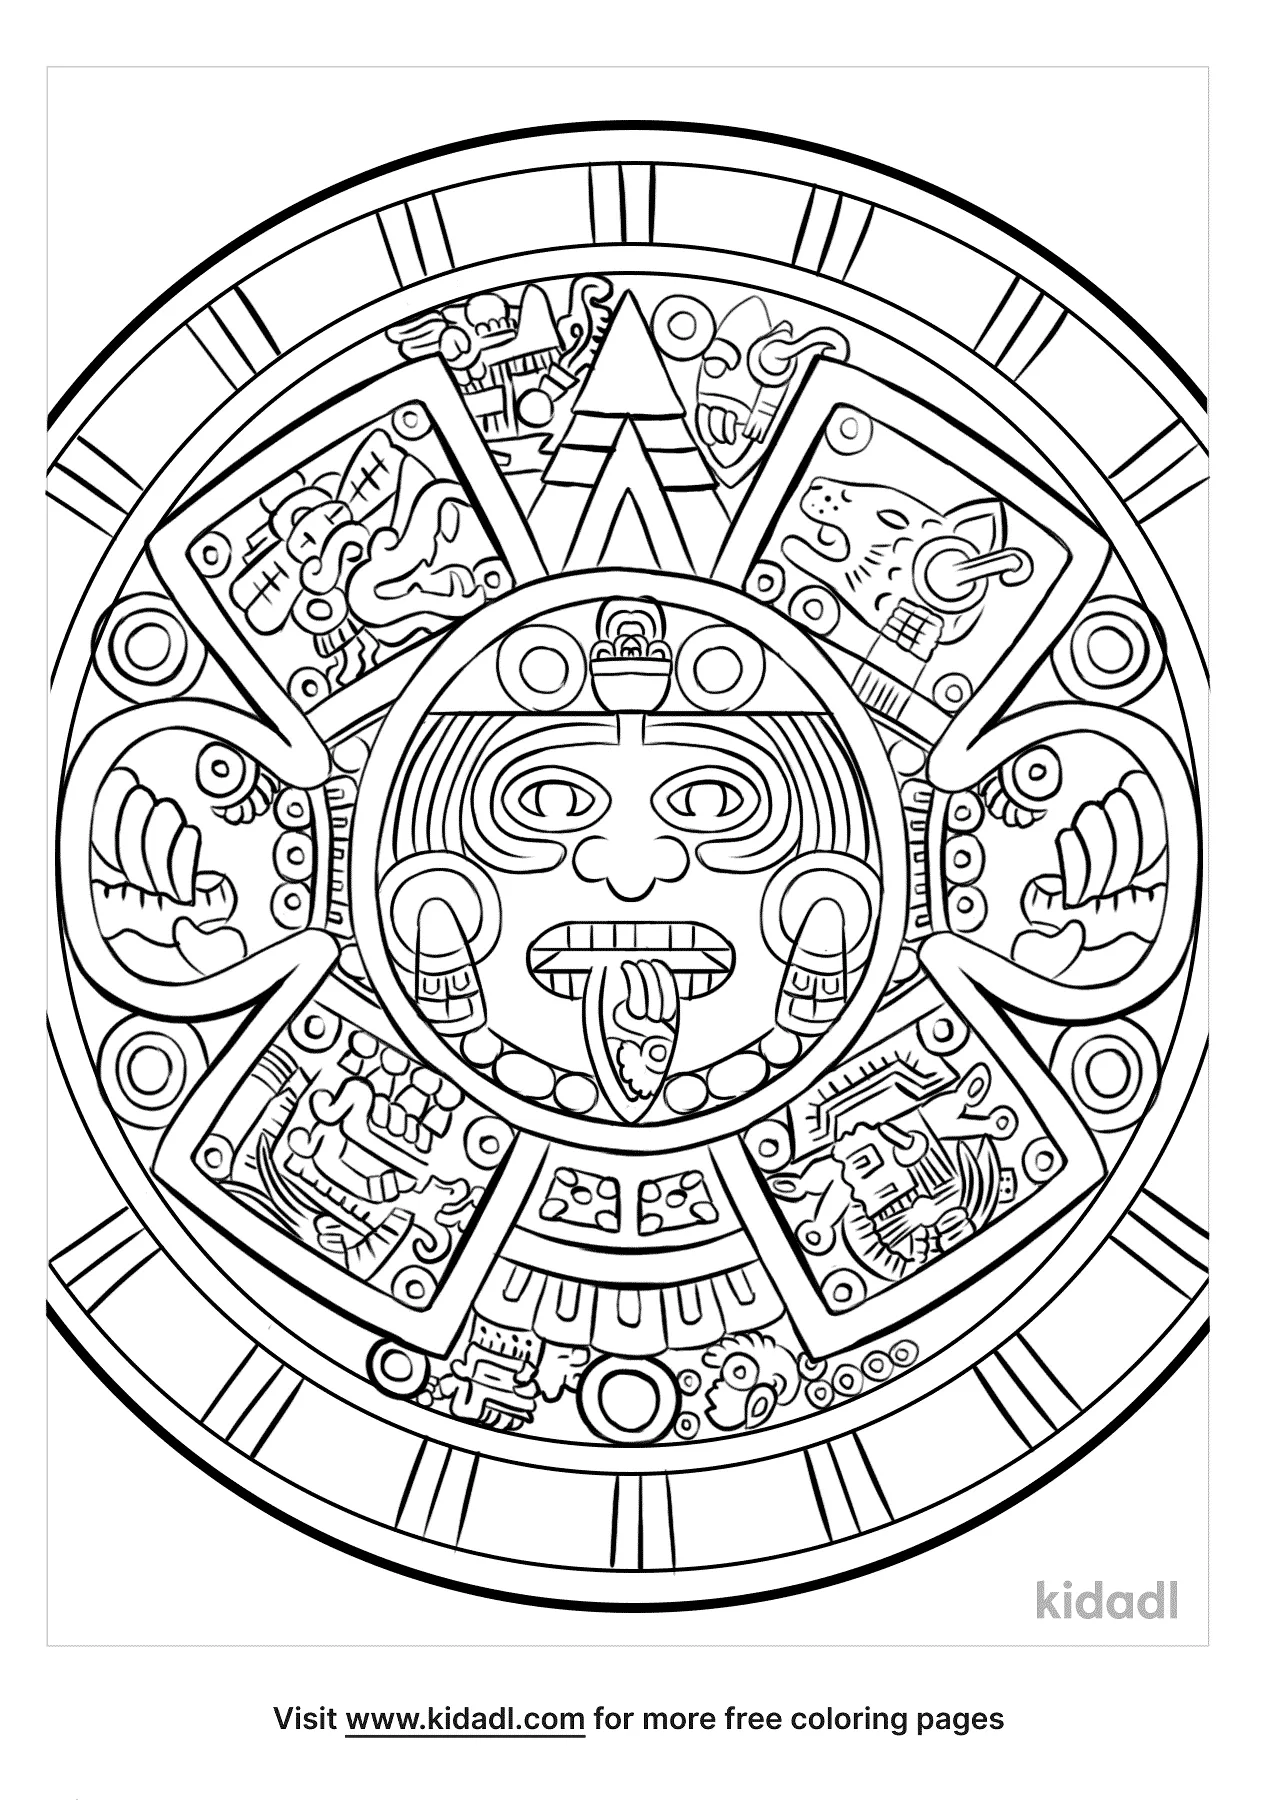 aztec-calendar-coloring-page-17-aztecs-coloring-pages-free-printable-coloring-pages-don-t